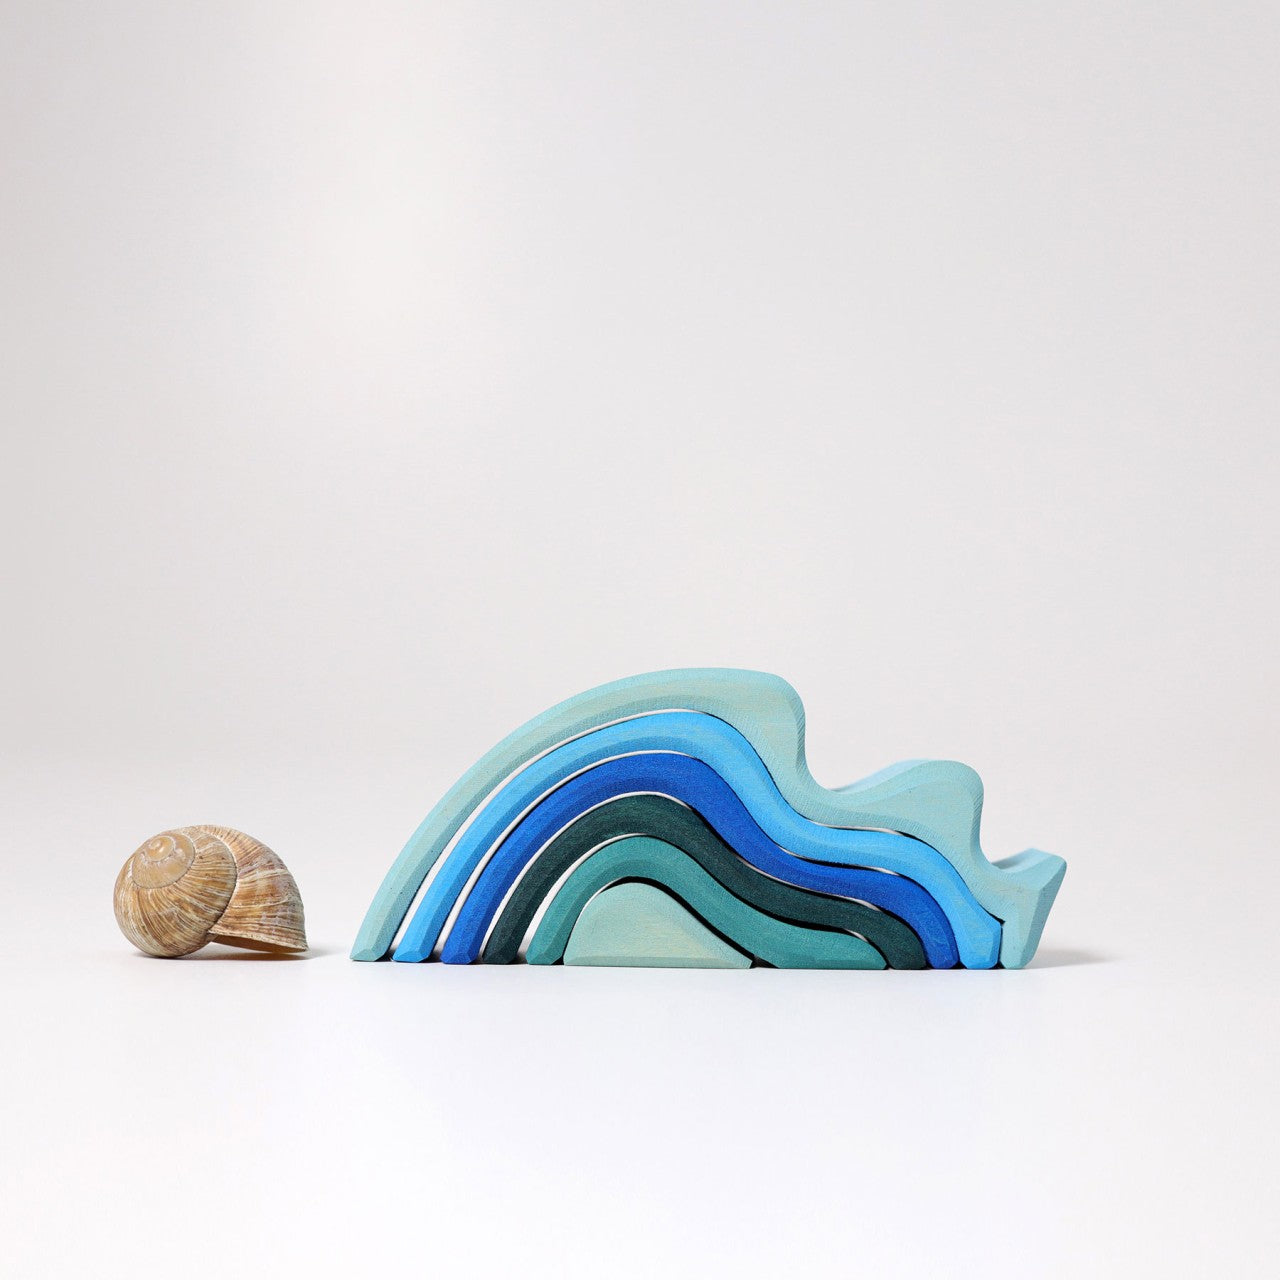 Small WaterWaves | 6 Pieces | Wooden Toys for Kids | Open-Ended Play